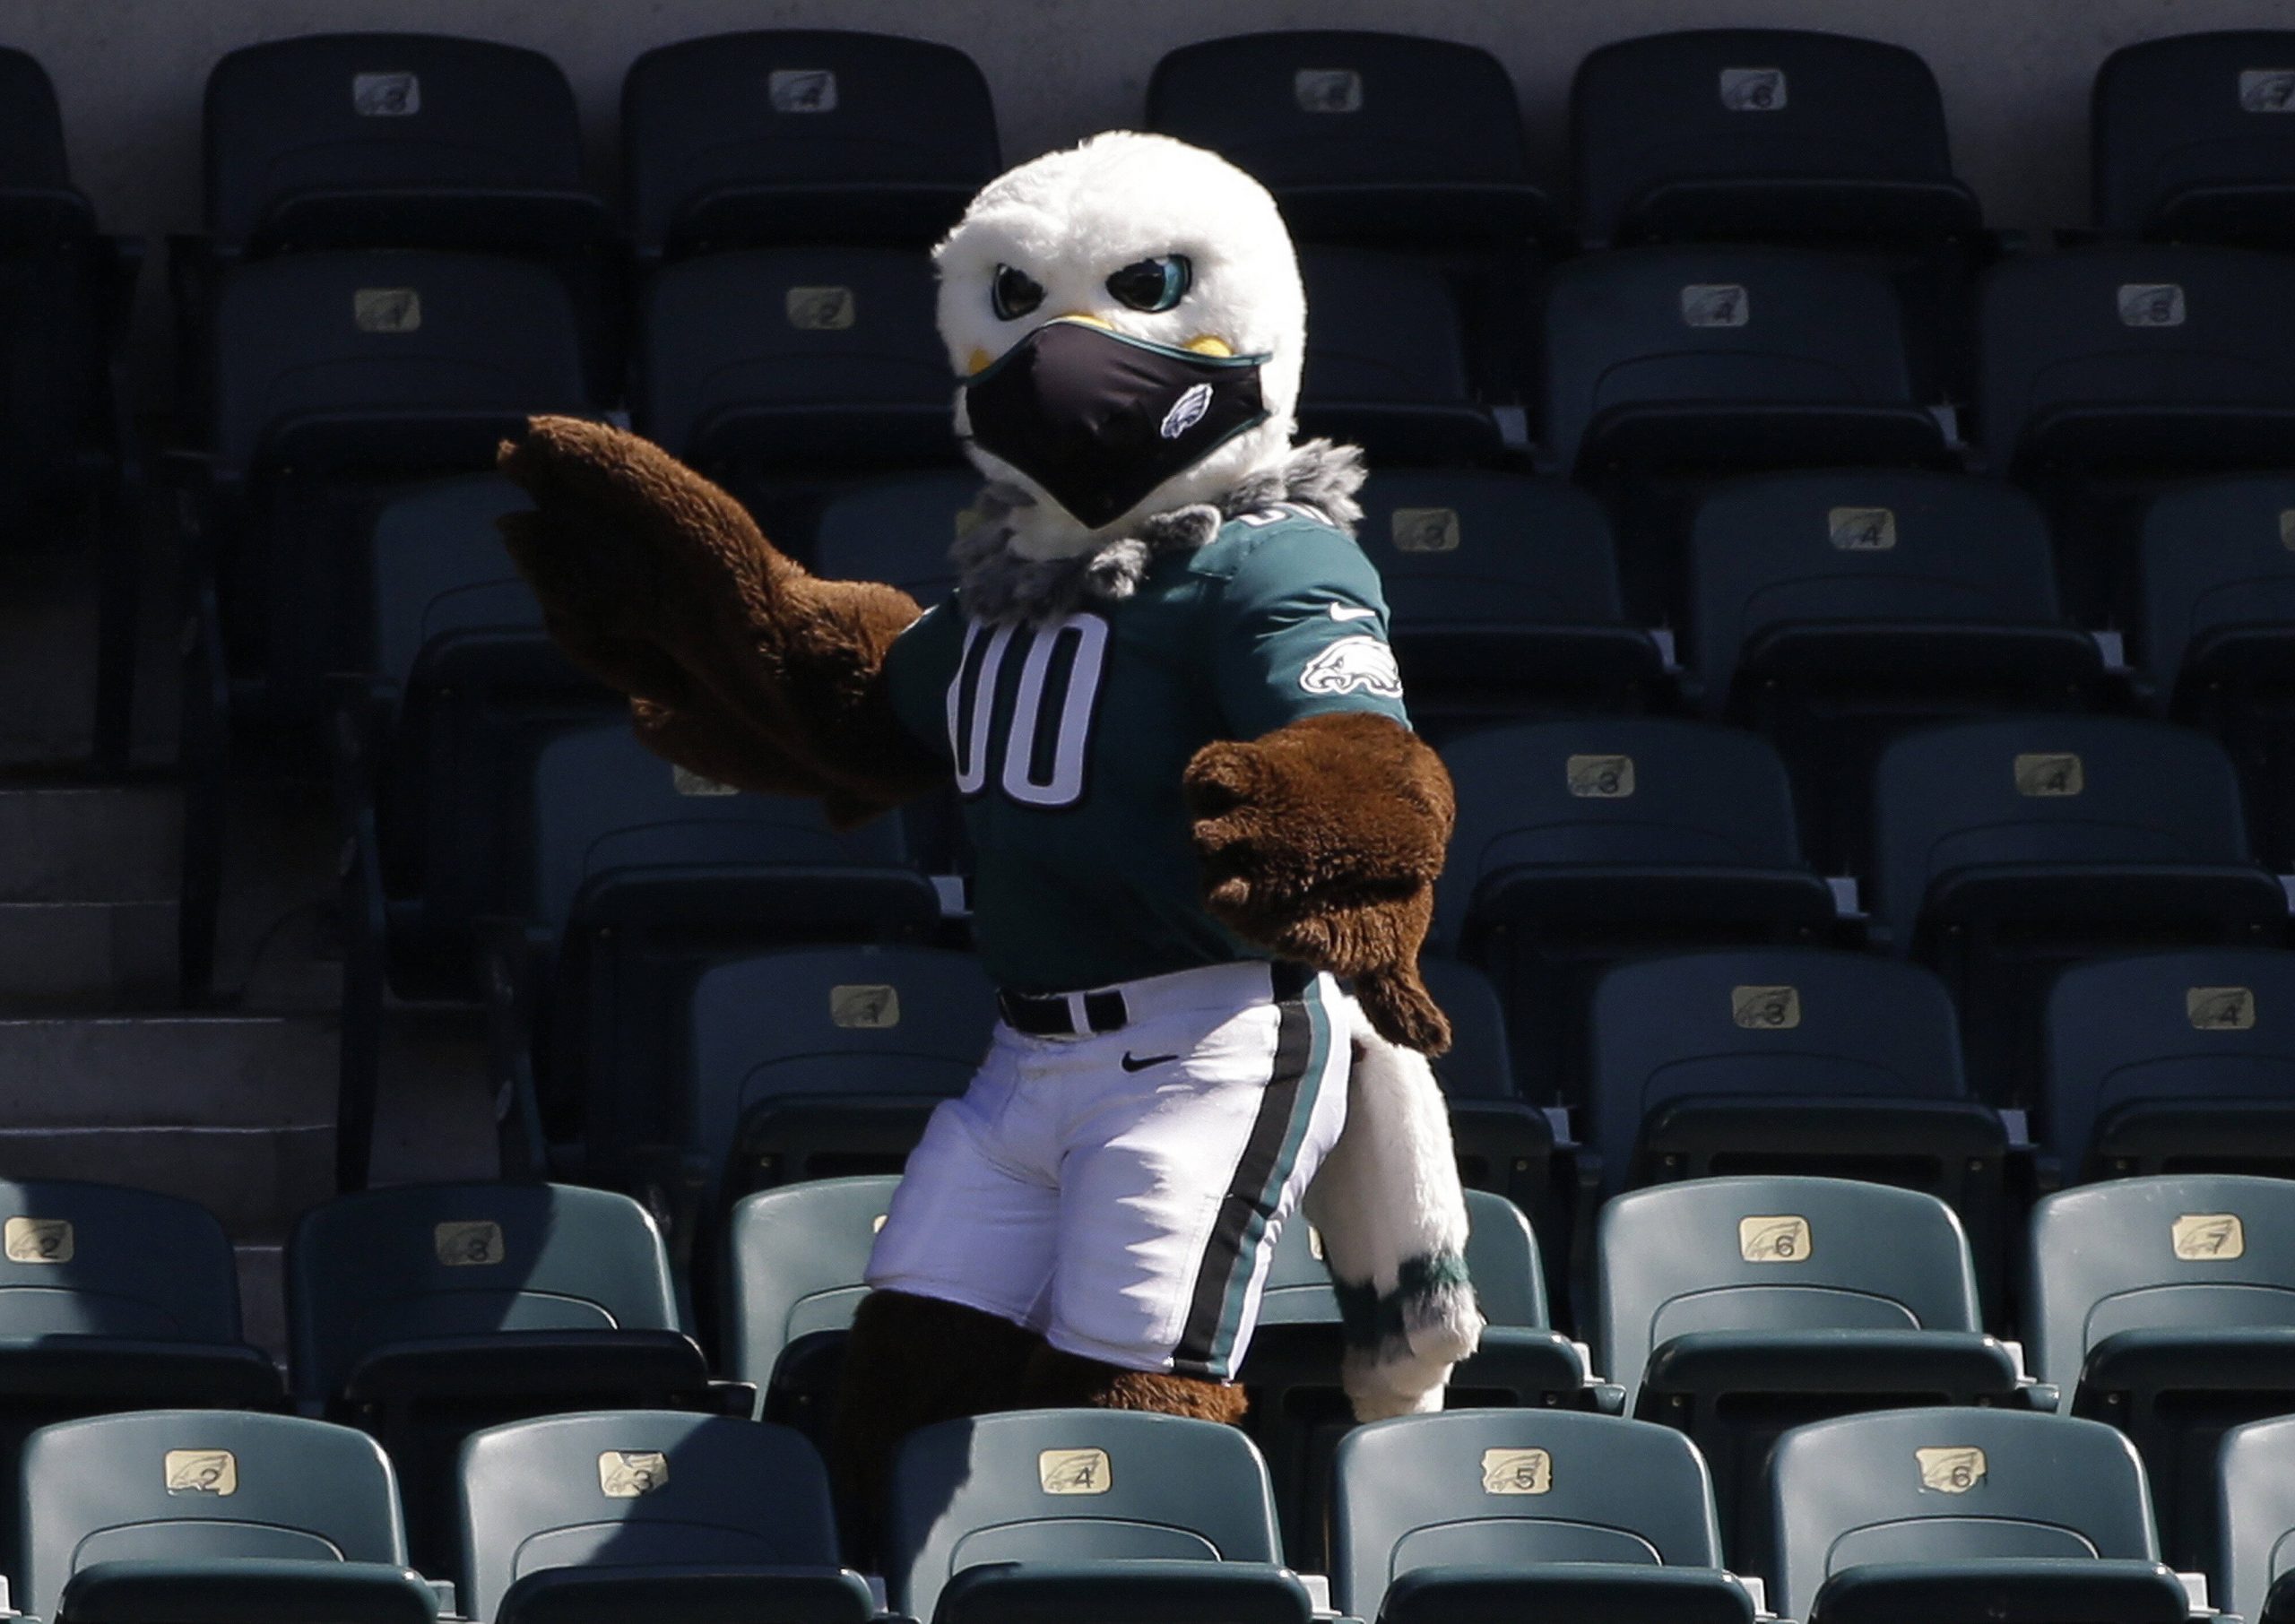 Swoop, the Philadelphia Eagles mascot, wears a face mask when the Los Angeles Rams play the Eagles in week 2 of the NFL,